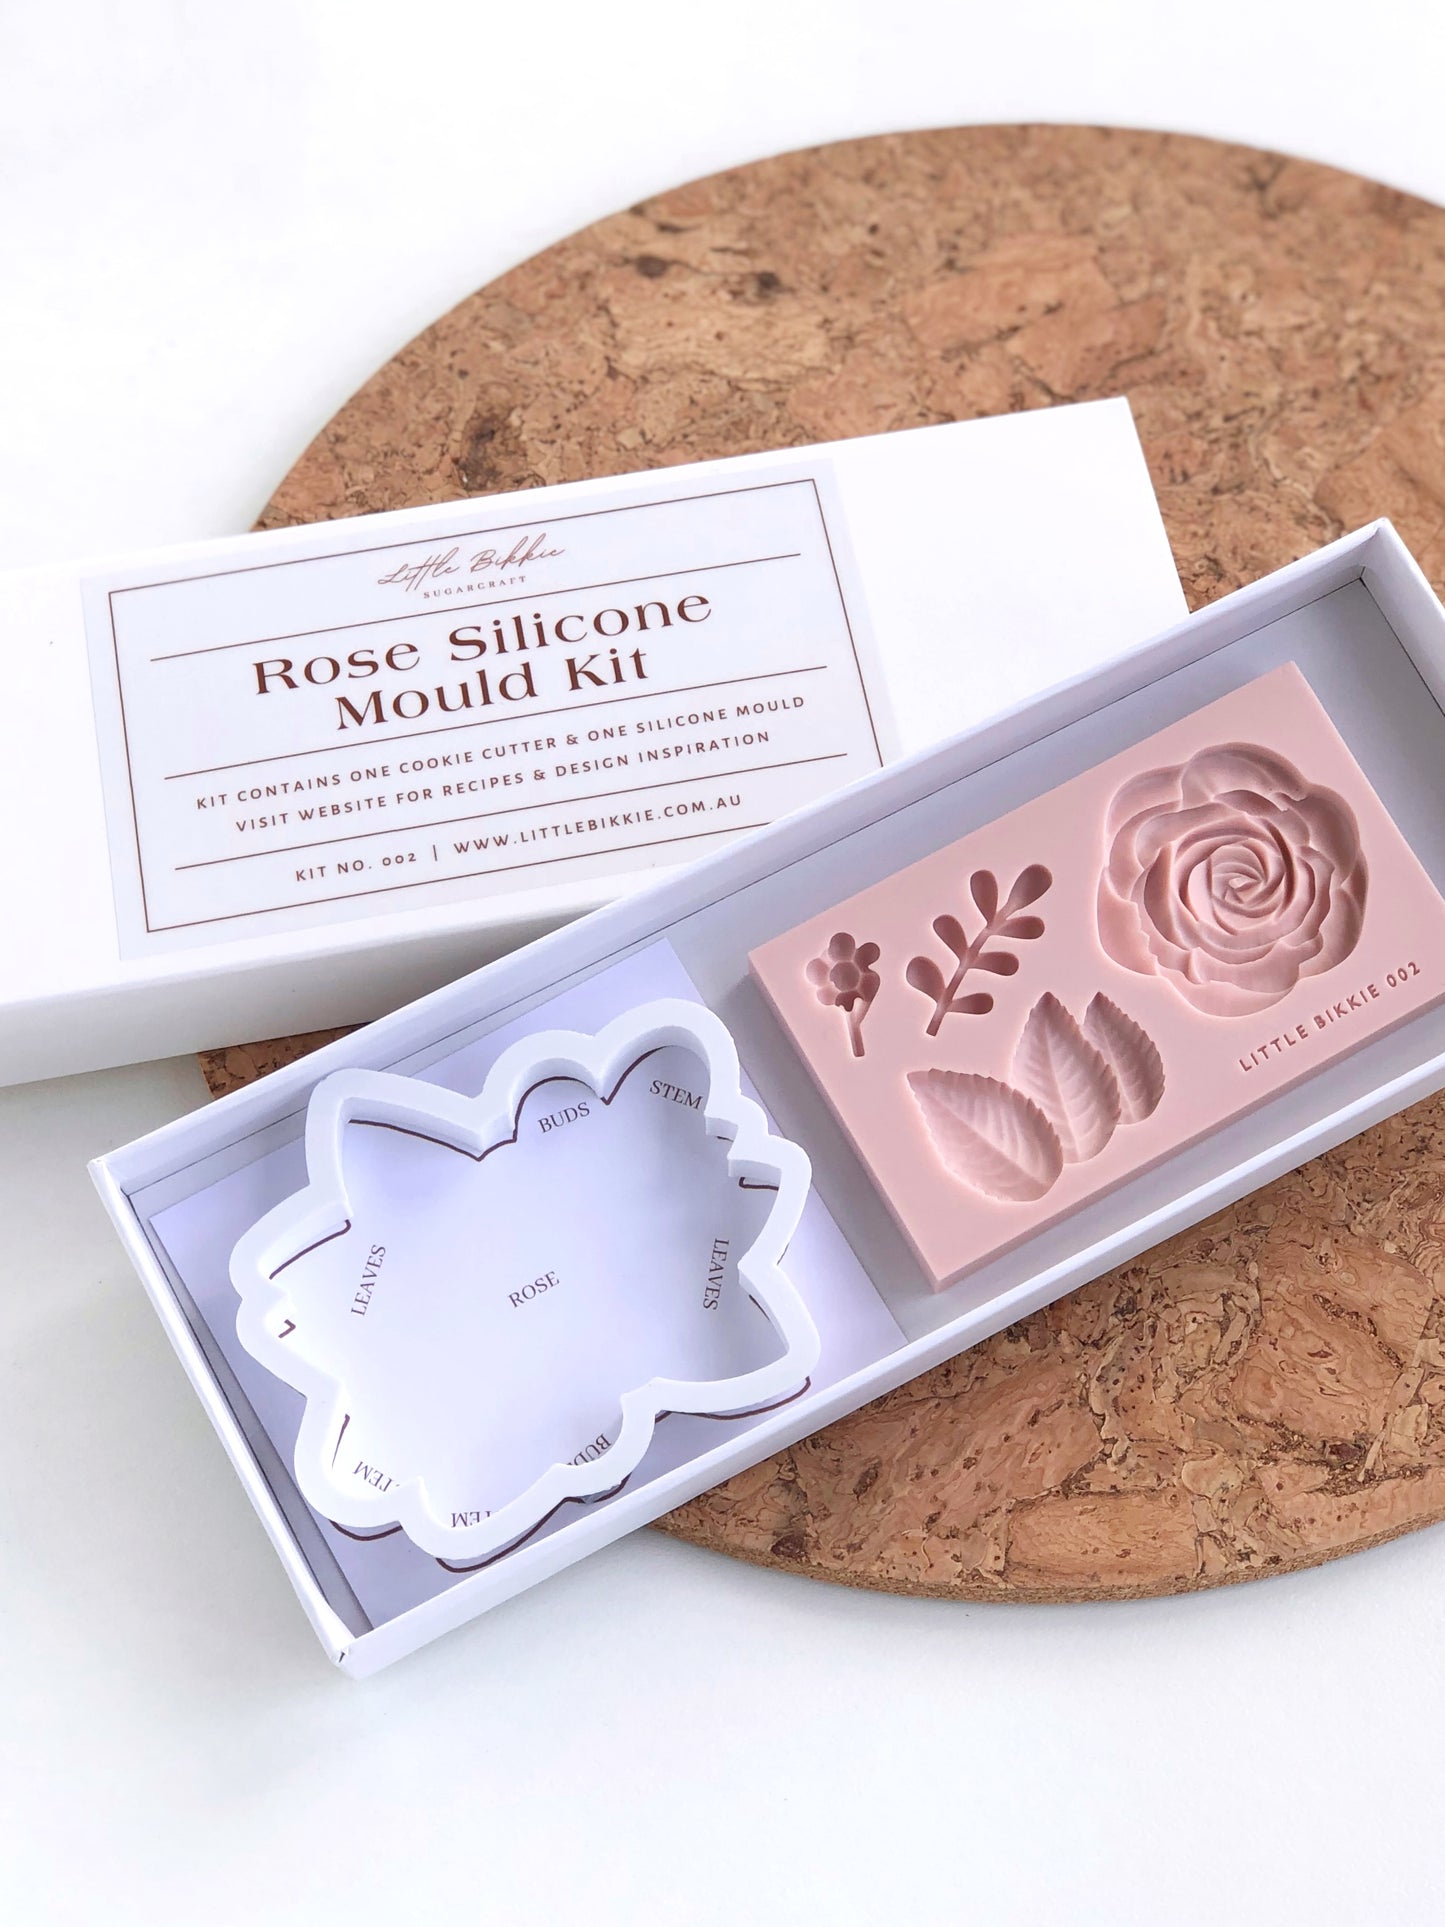 Rose Silicone Mould Kit